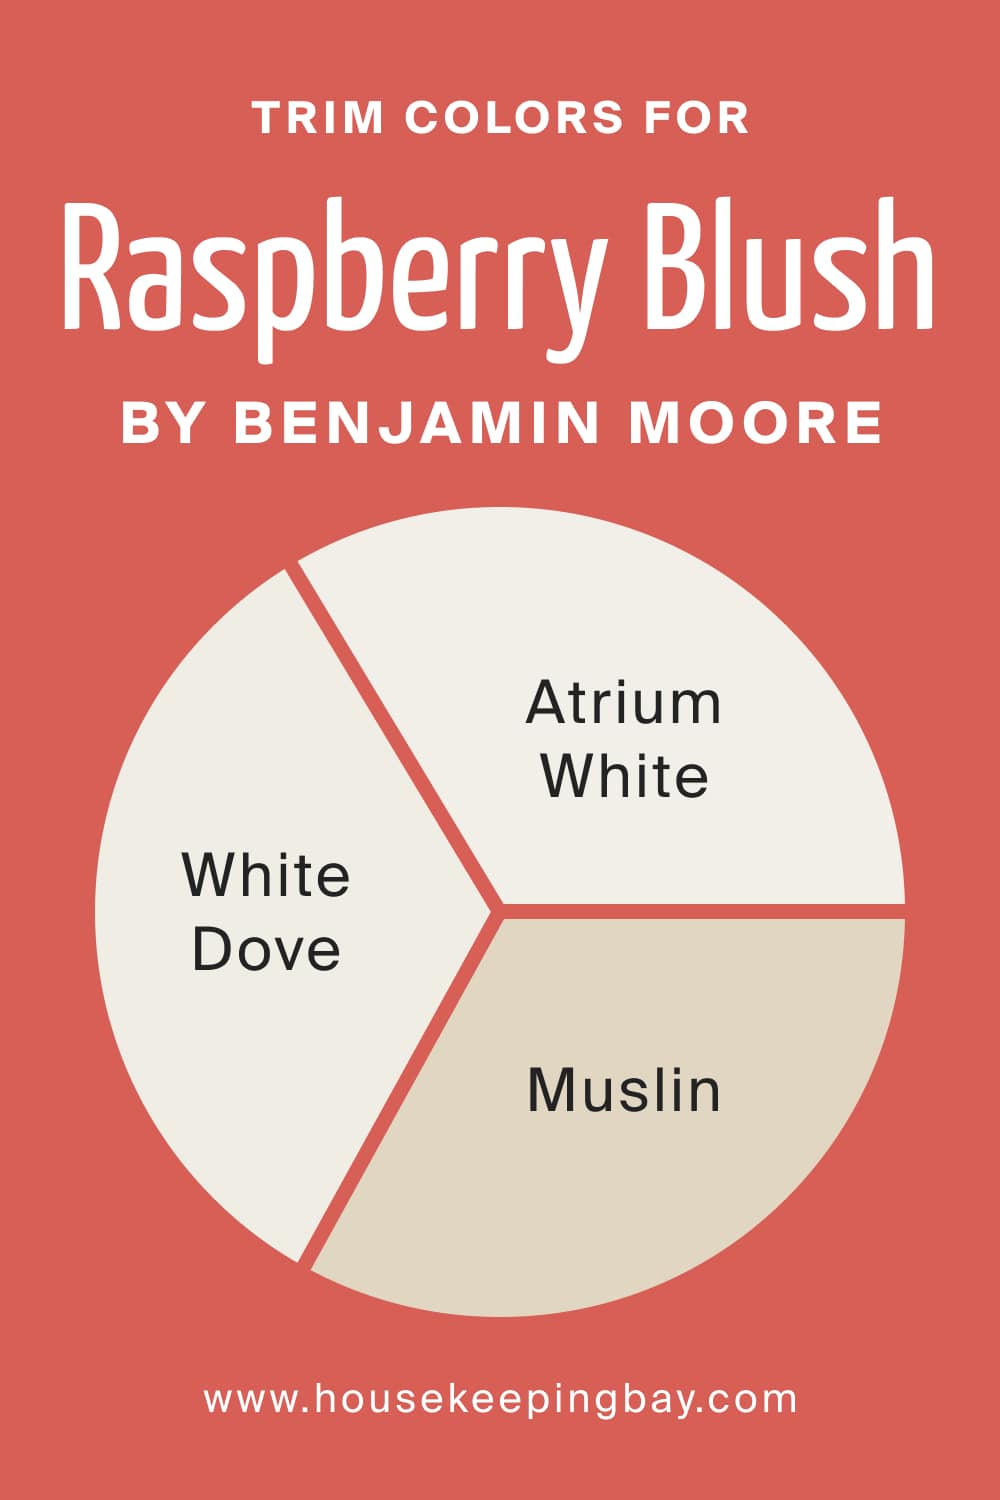 Trim Colors for Raspberry Blush 2008 30 by Benjamin Moore